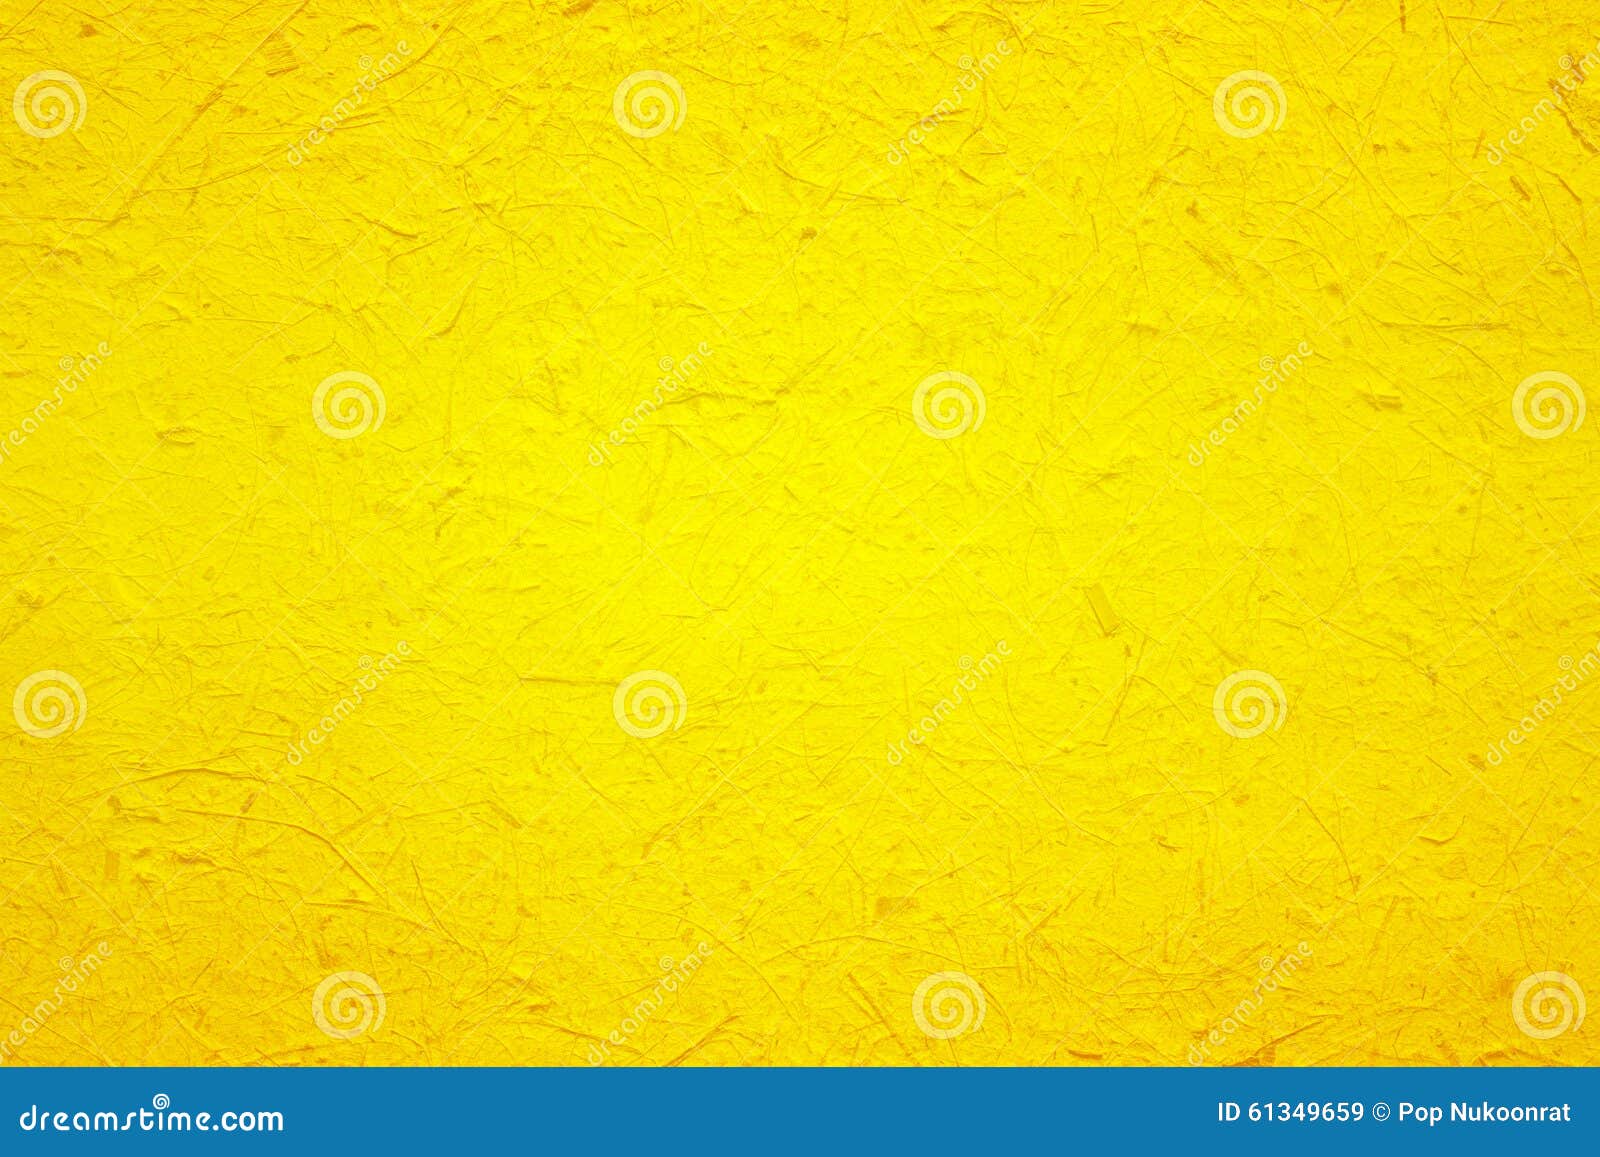 620+ Yellow Scrap Paper Stock Photos, Pictures & Royalty-Free